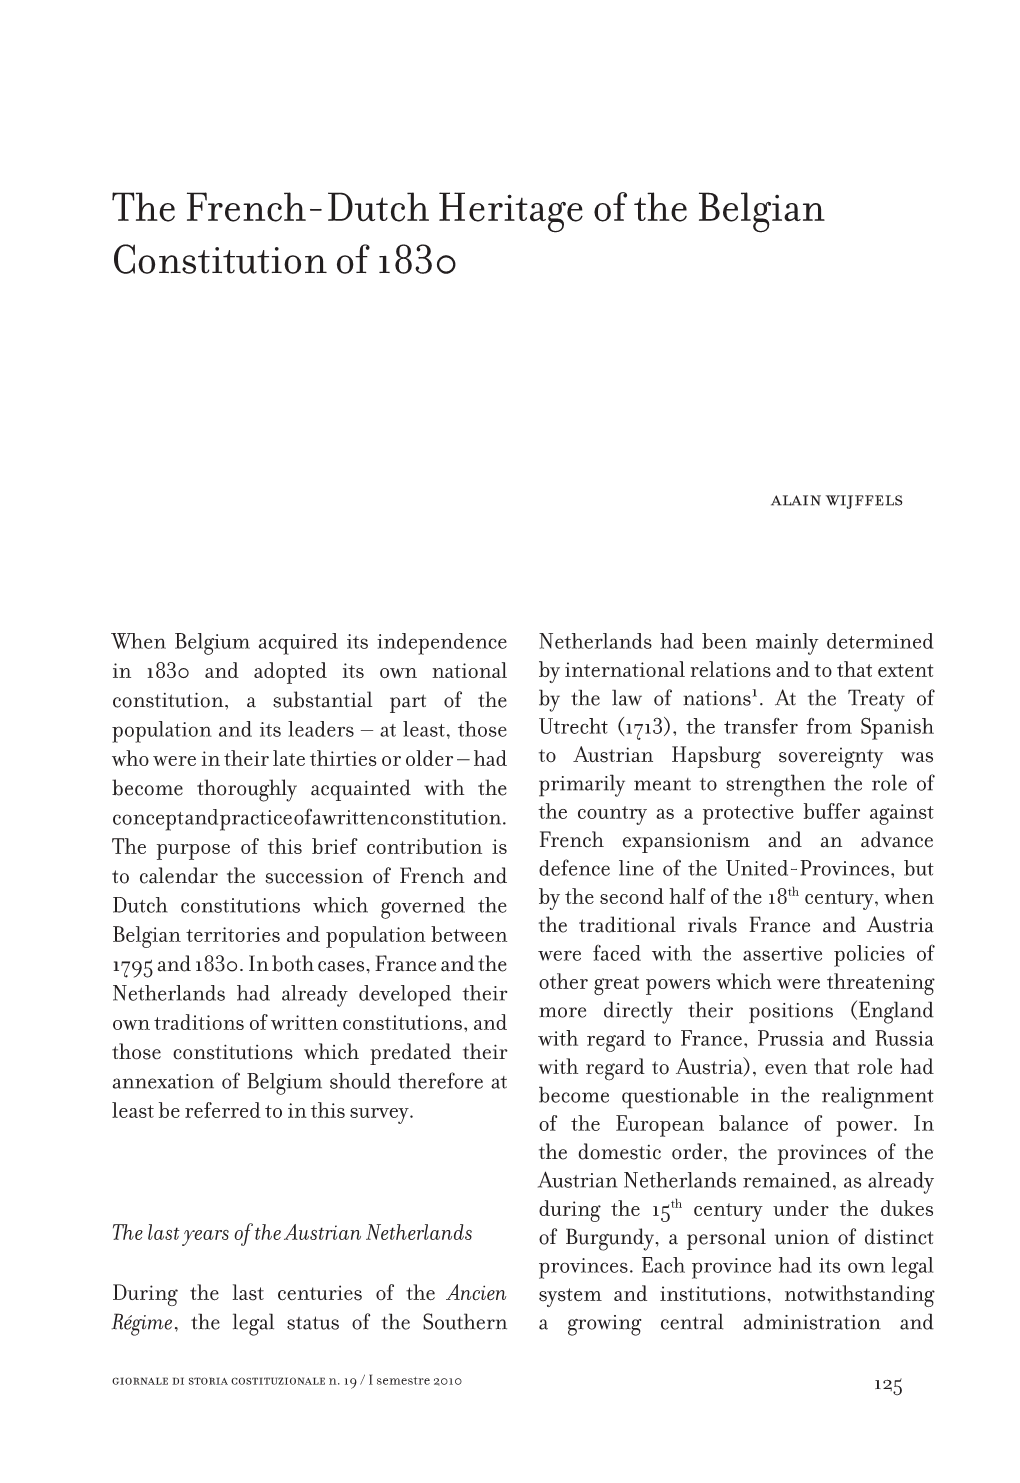 The French-Dutch Heritage of the Belgian Constitution of 1830